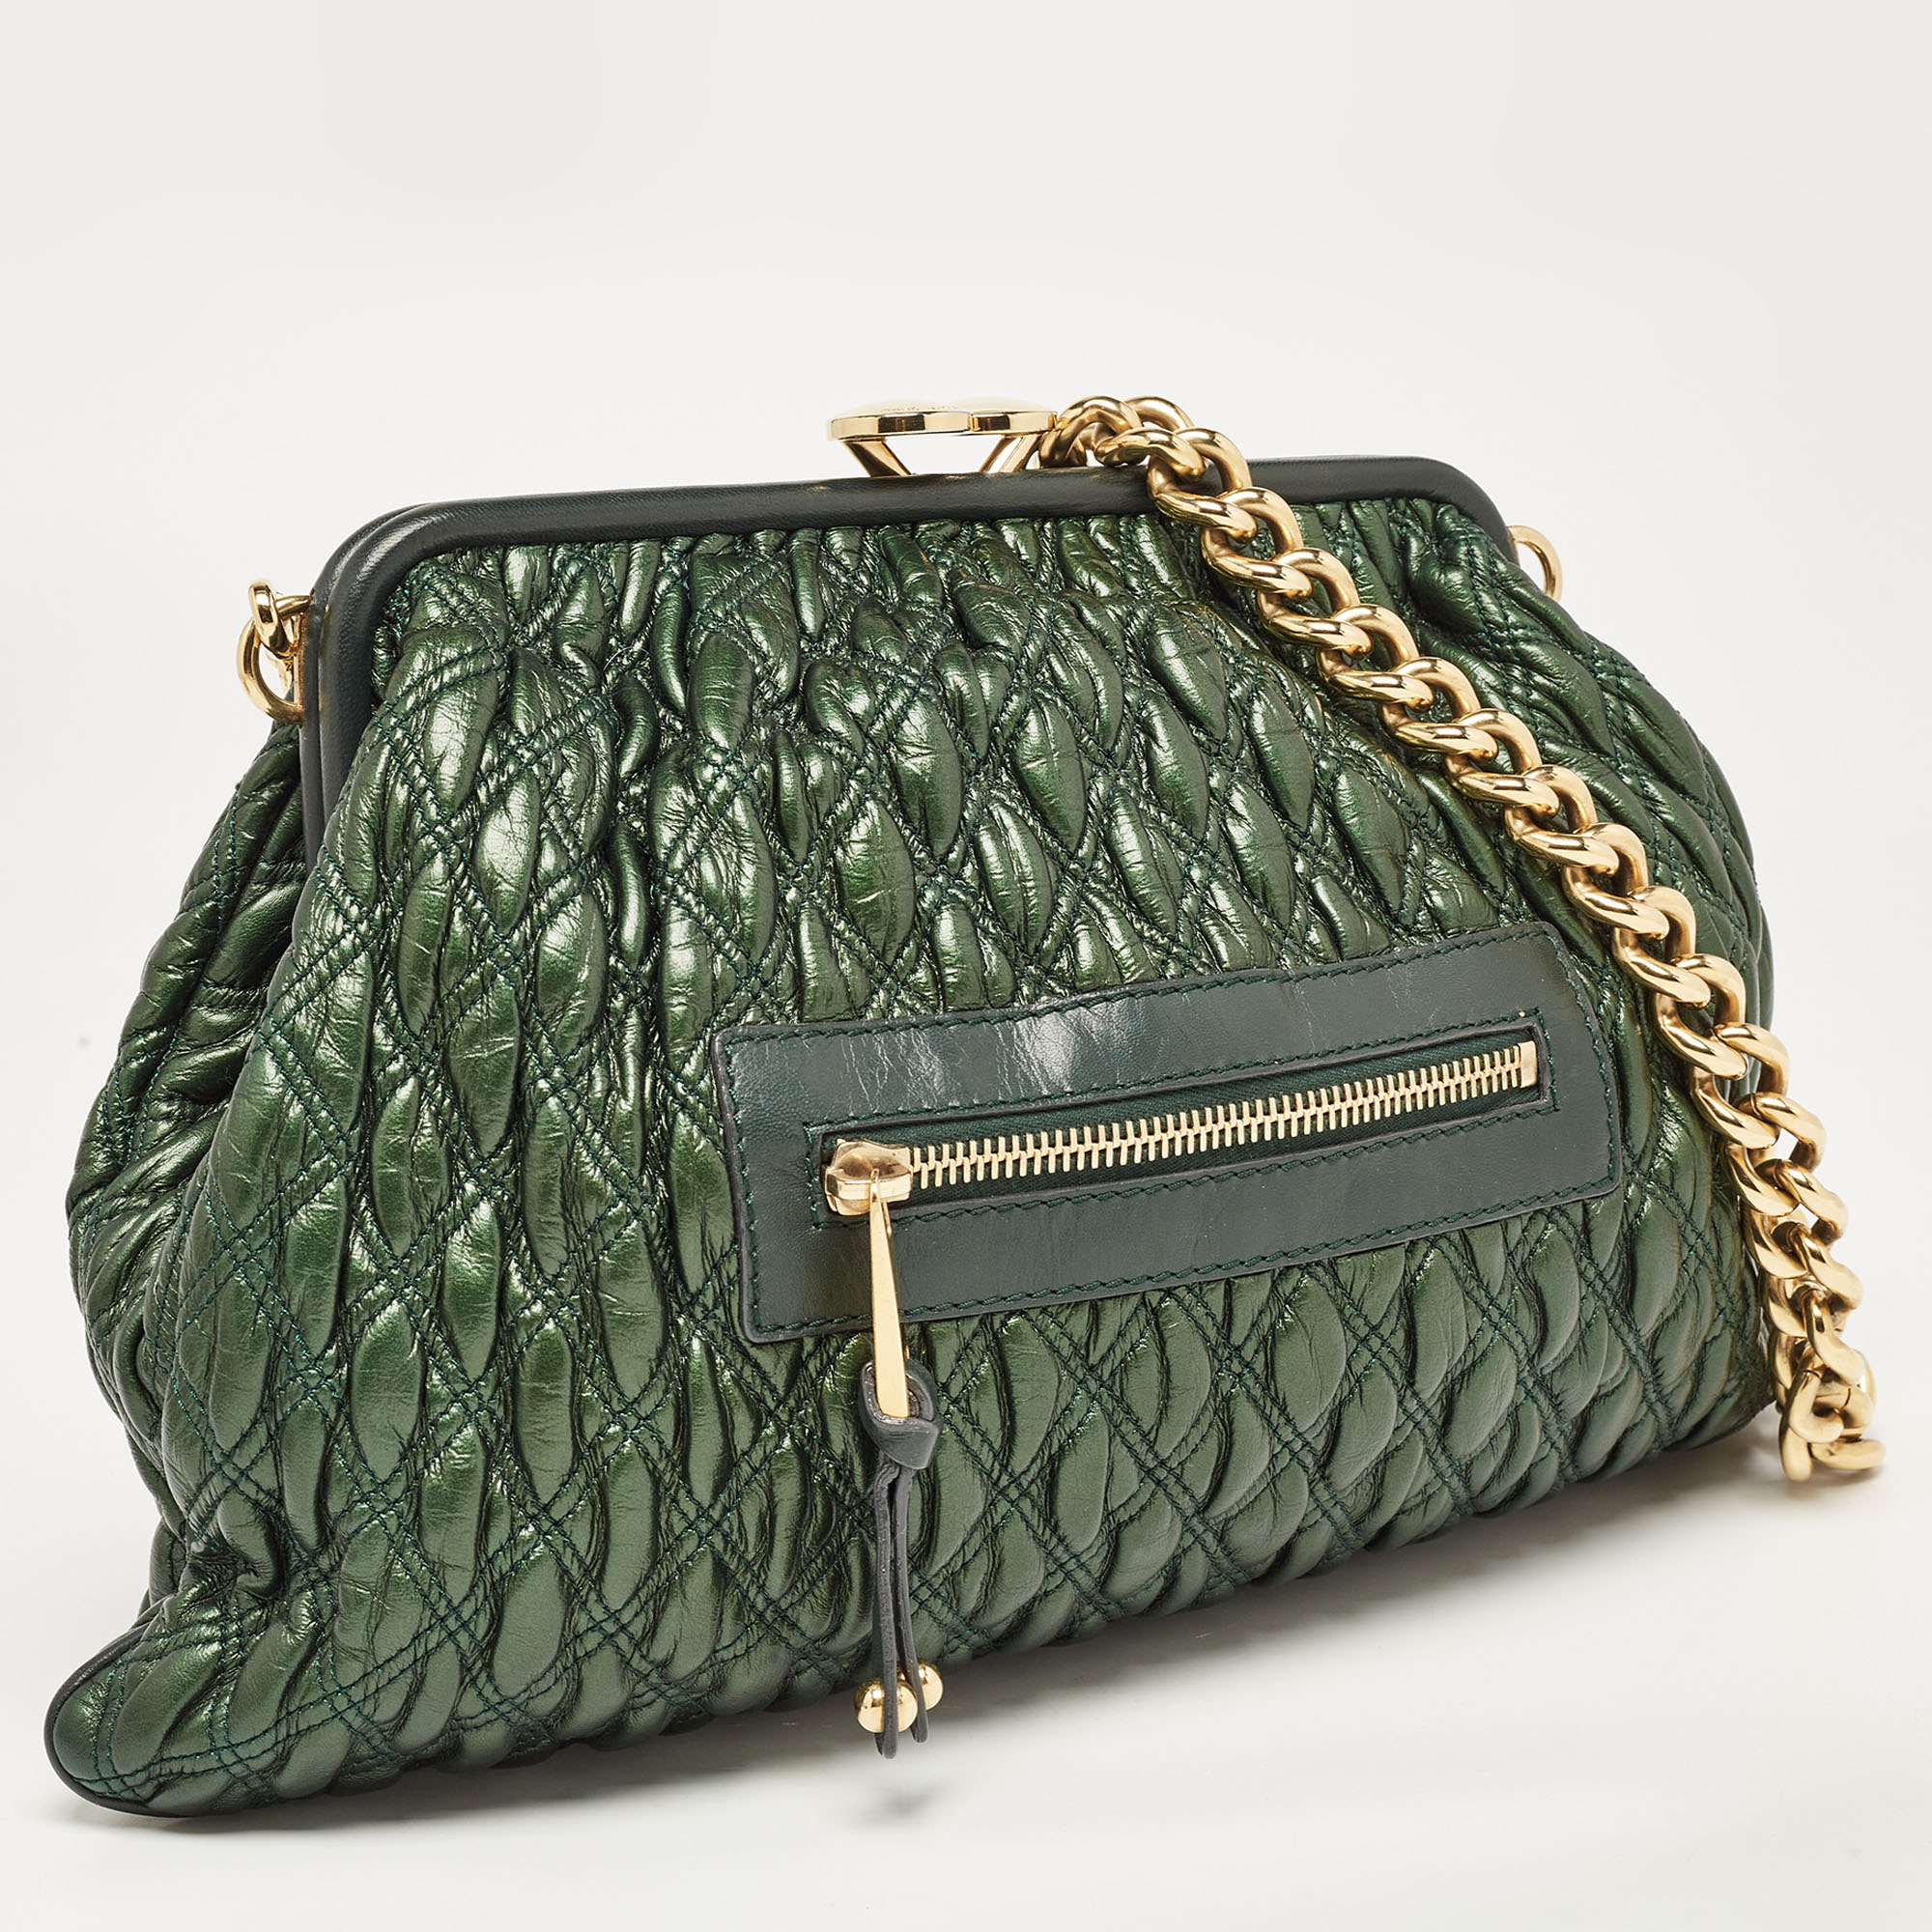 Marc Jacobs Metallic Green Quilted Leather Stam Shoulder Bag